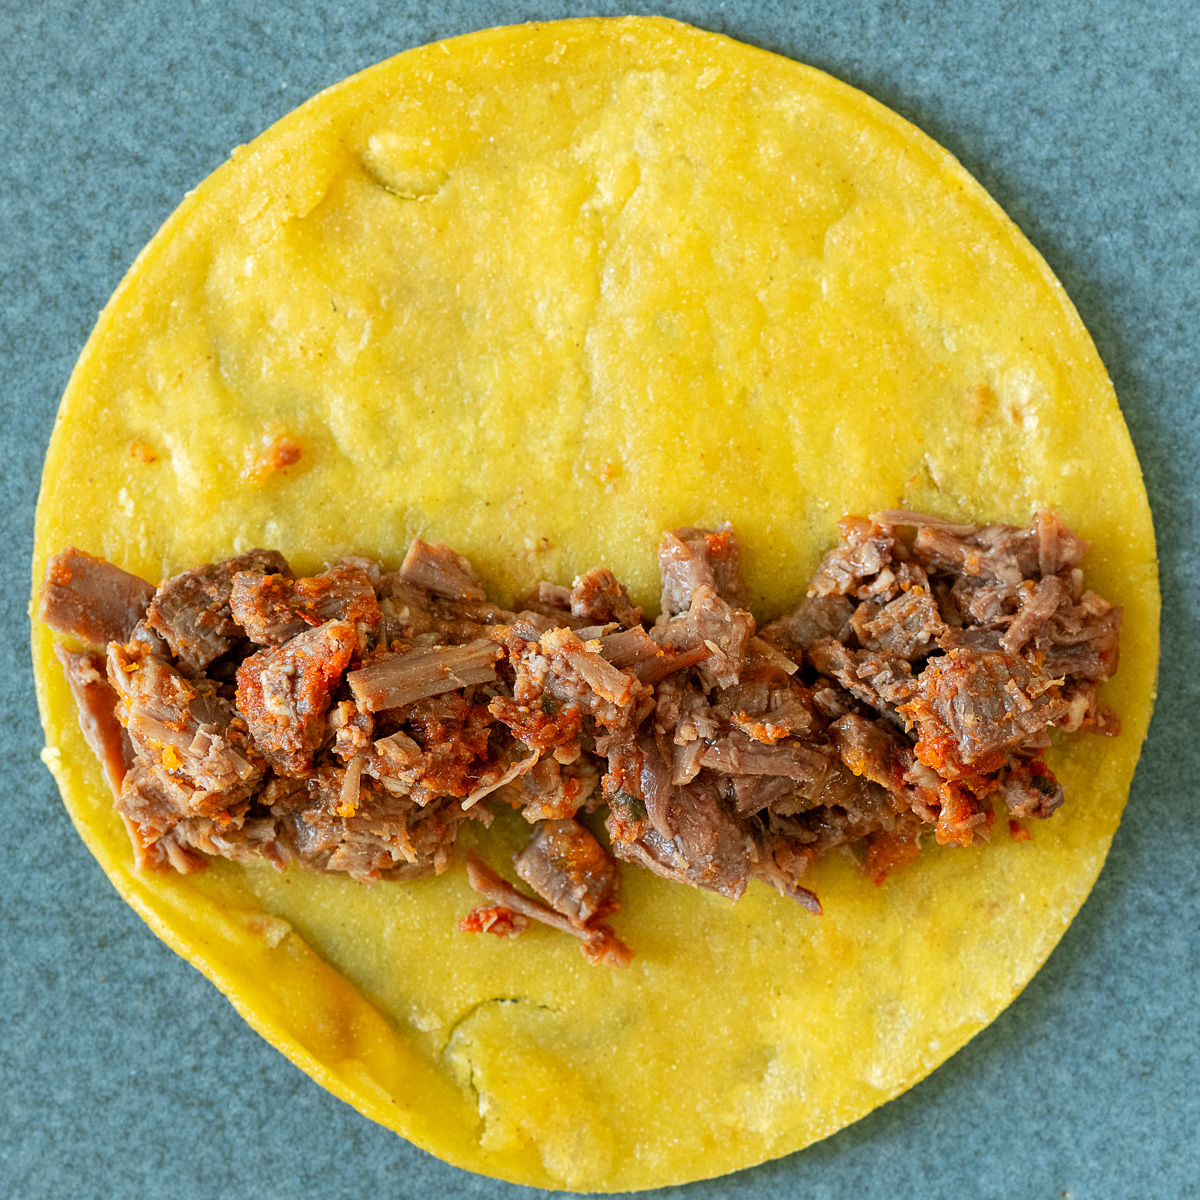 Place brisket in the bottom third of the tortilla.